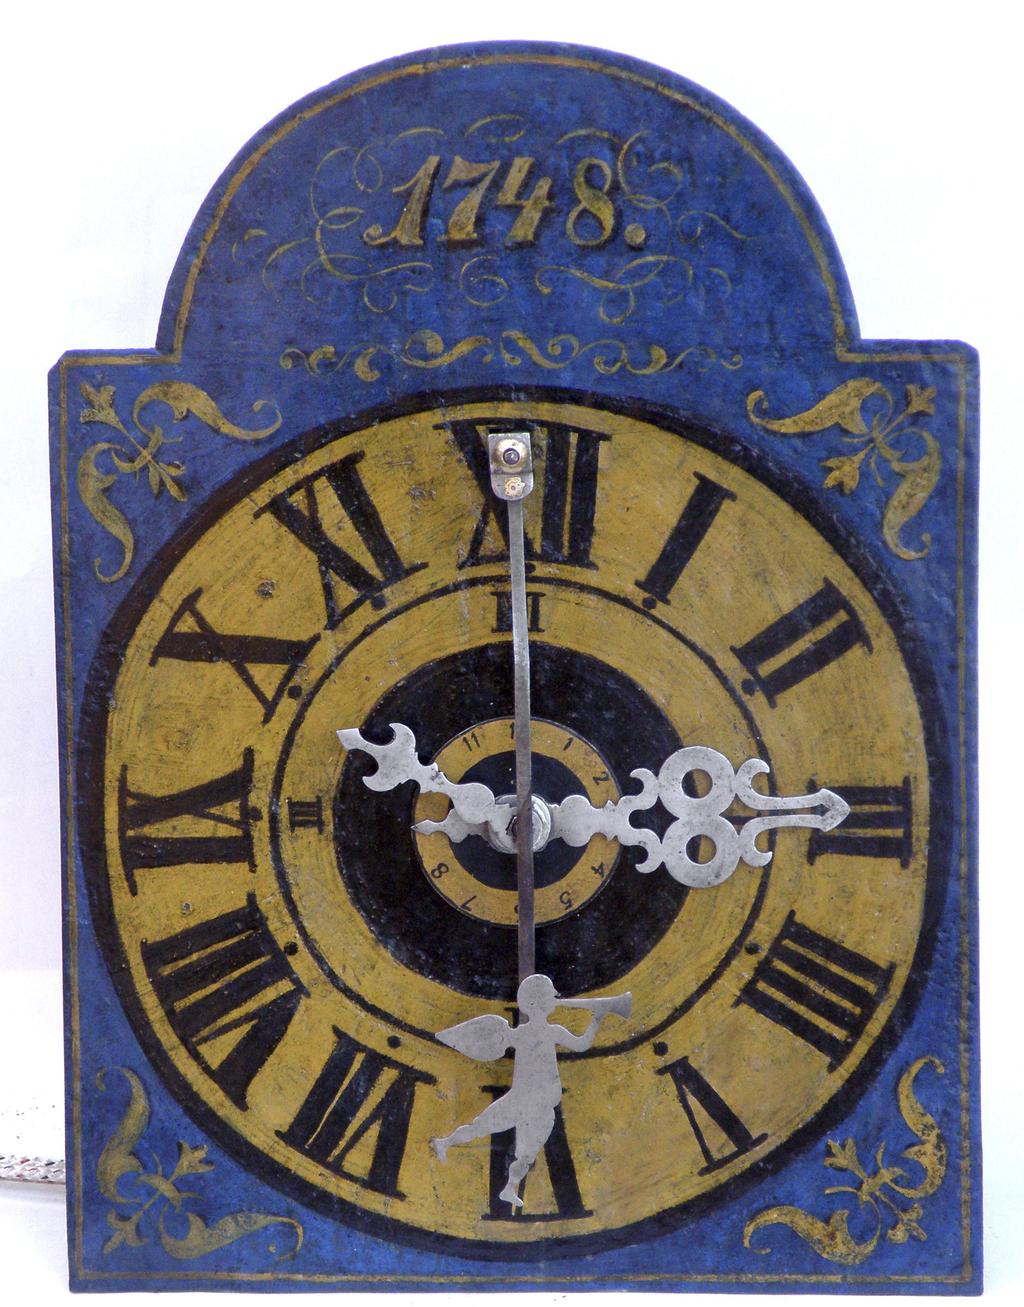 2013 Antiquarian Horological Society. Reproduction prohibited without permission.